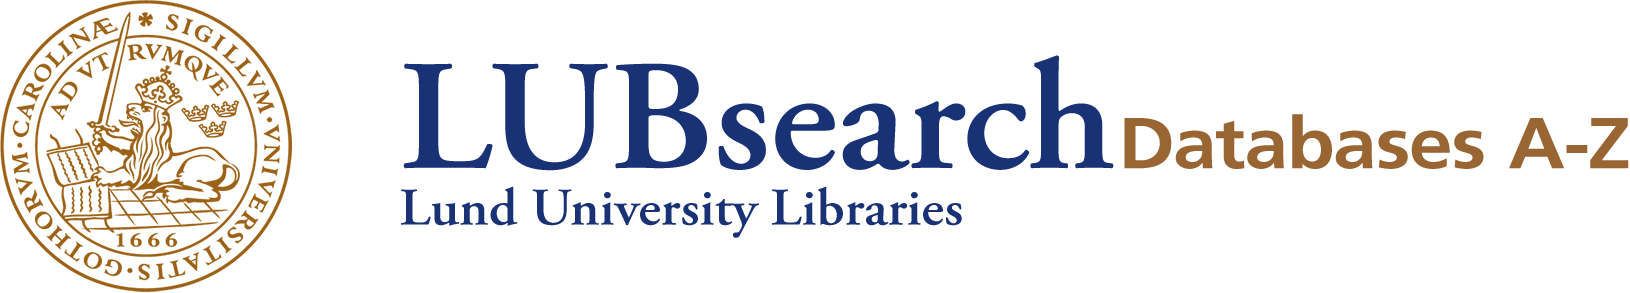 Licensed and free resources selected by librarians